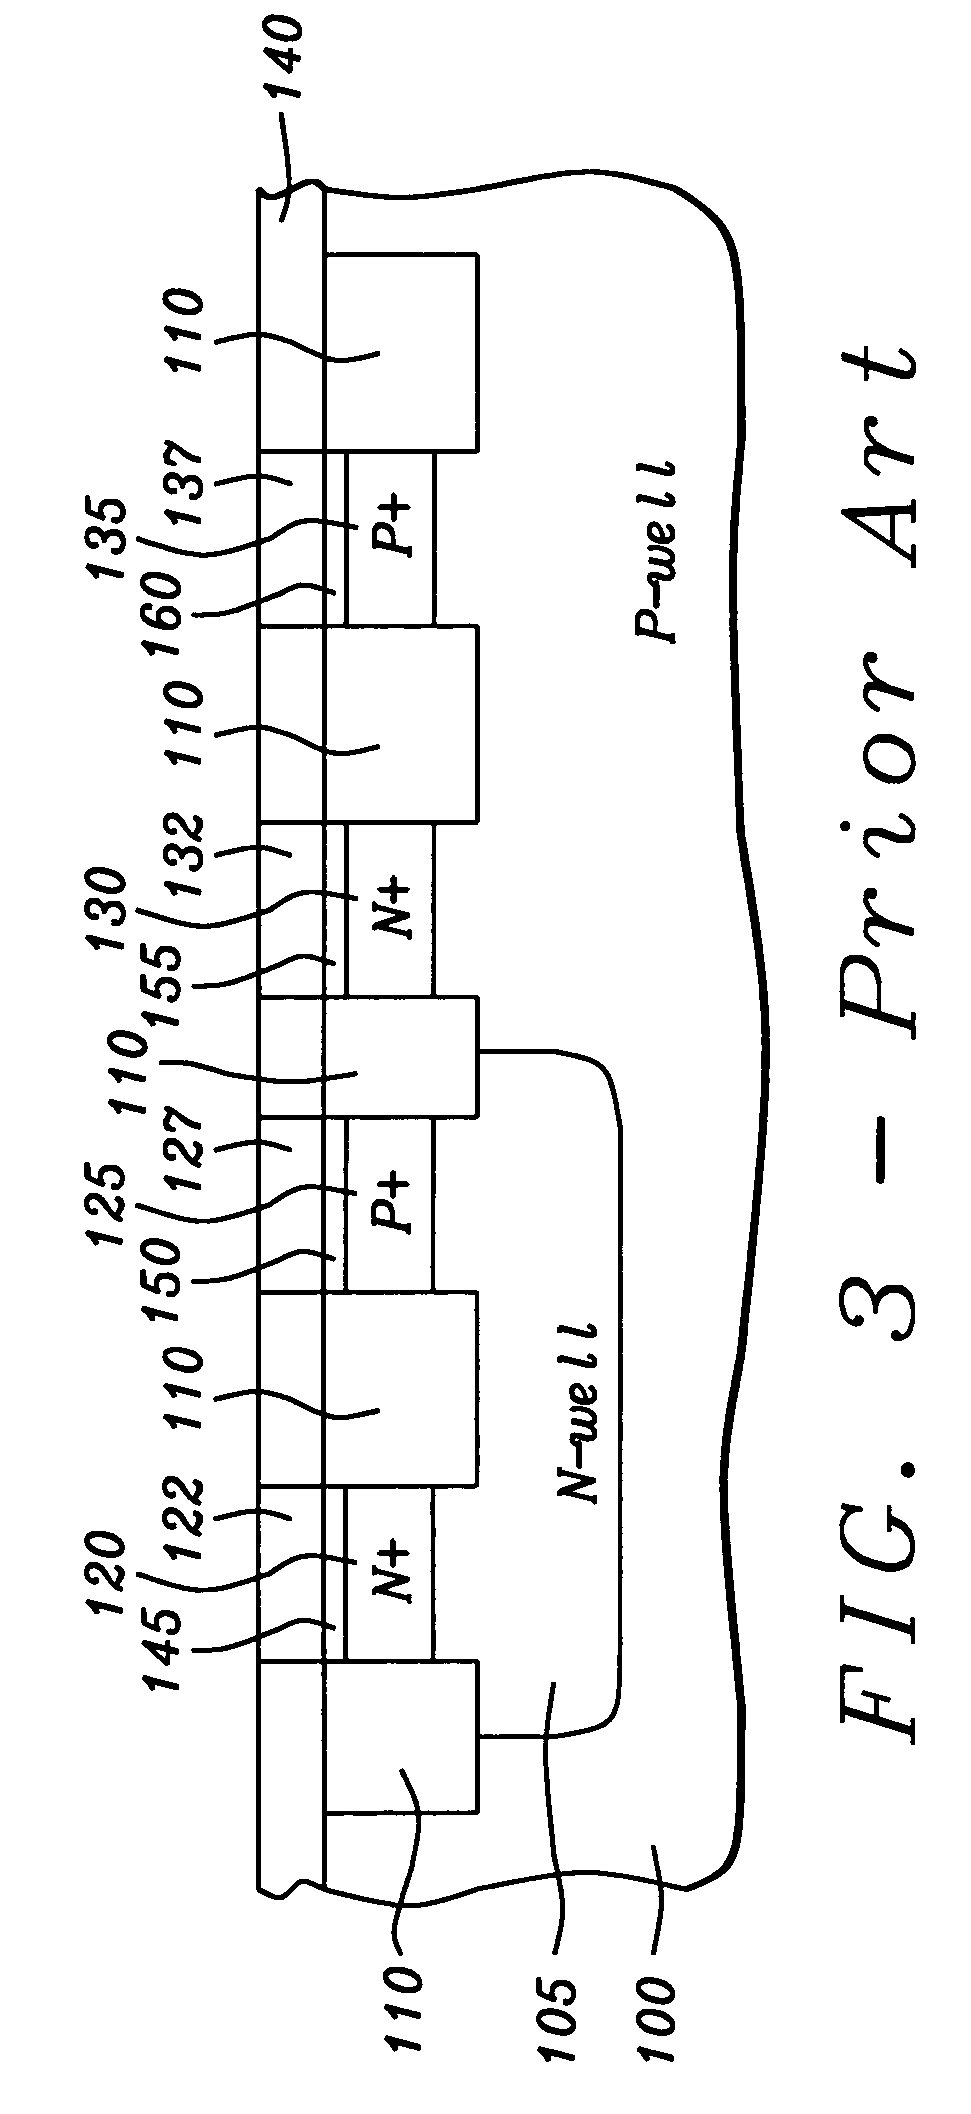 Triggered silicon controlled rectifier for RF ESD protection